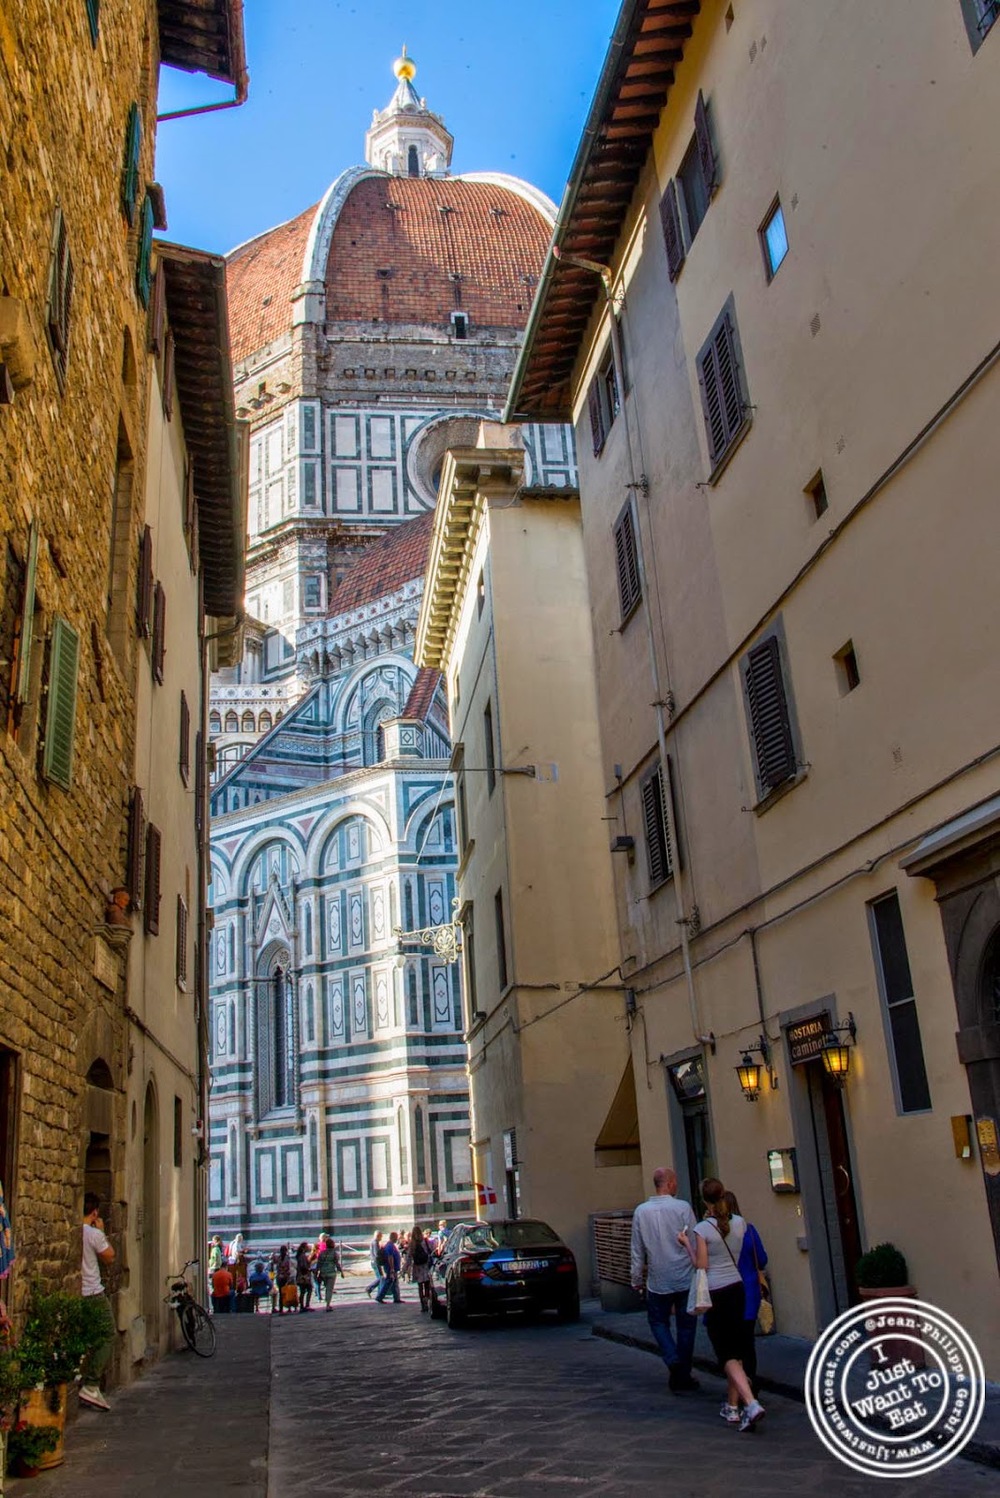 image of The Duomo in Florence, Italy